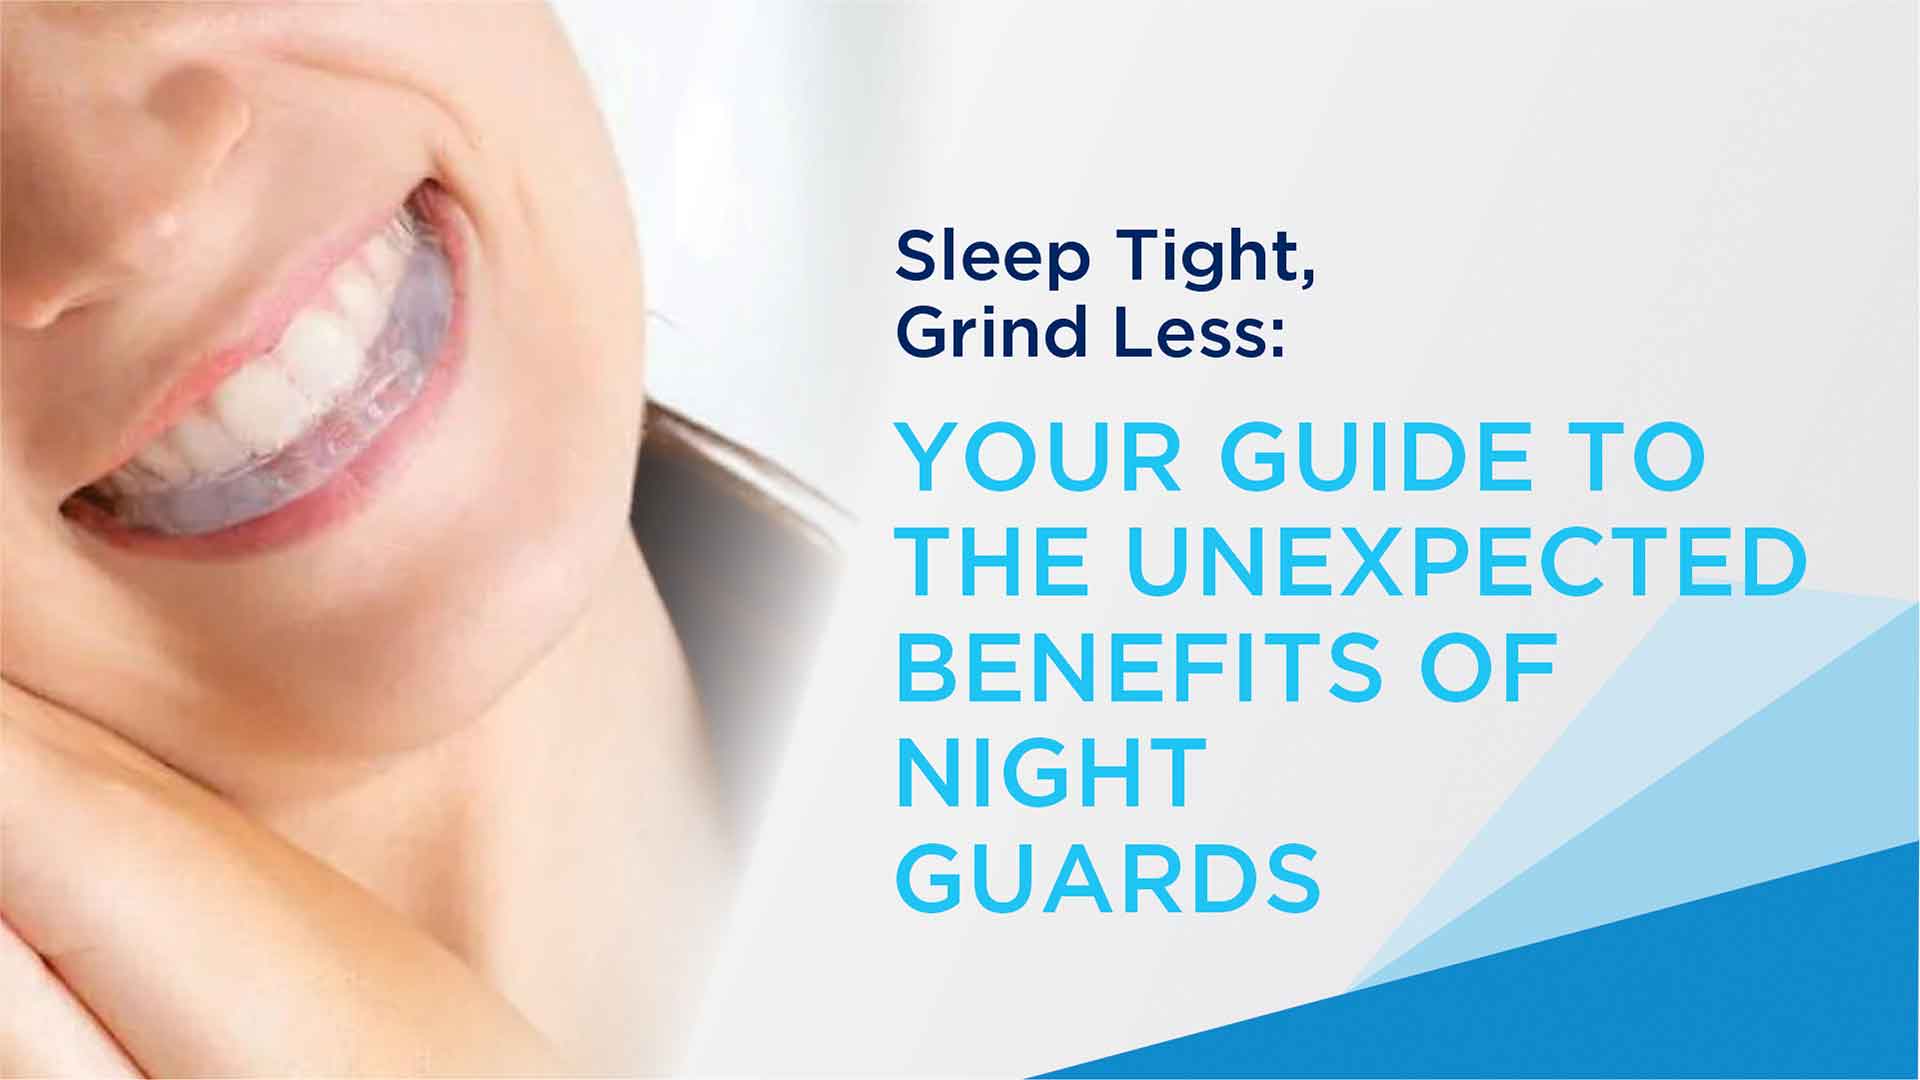 Sleep Tight, Grind Less: Your Guide to the Unexpected Benefits of Night Guards